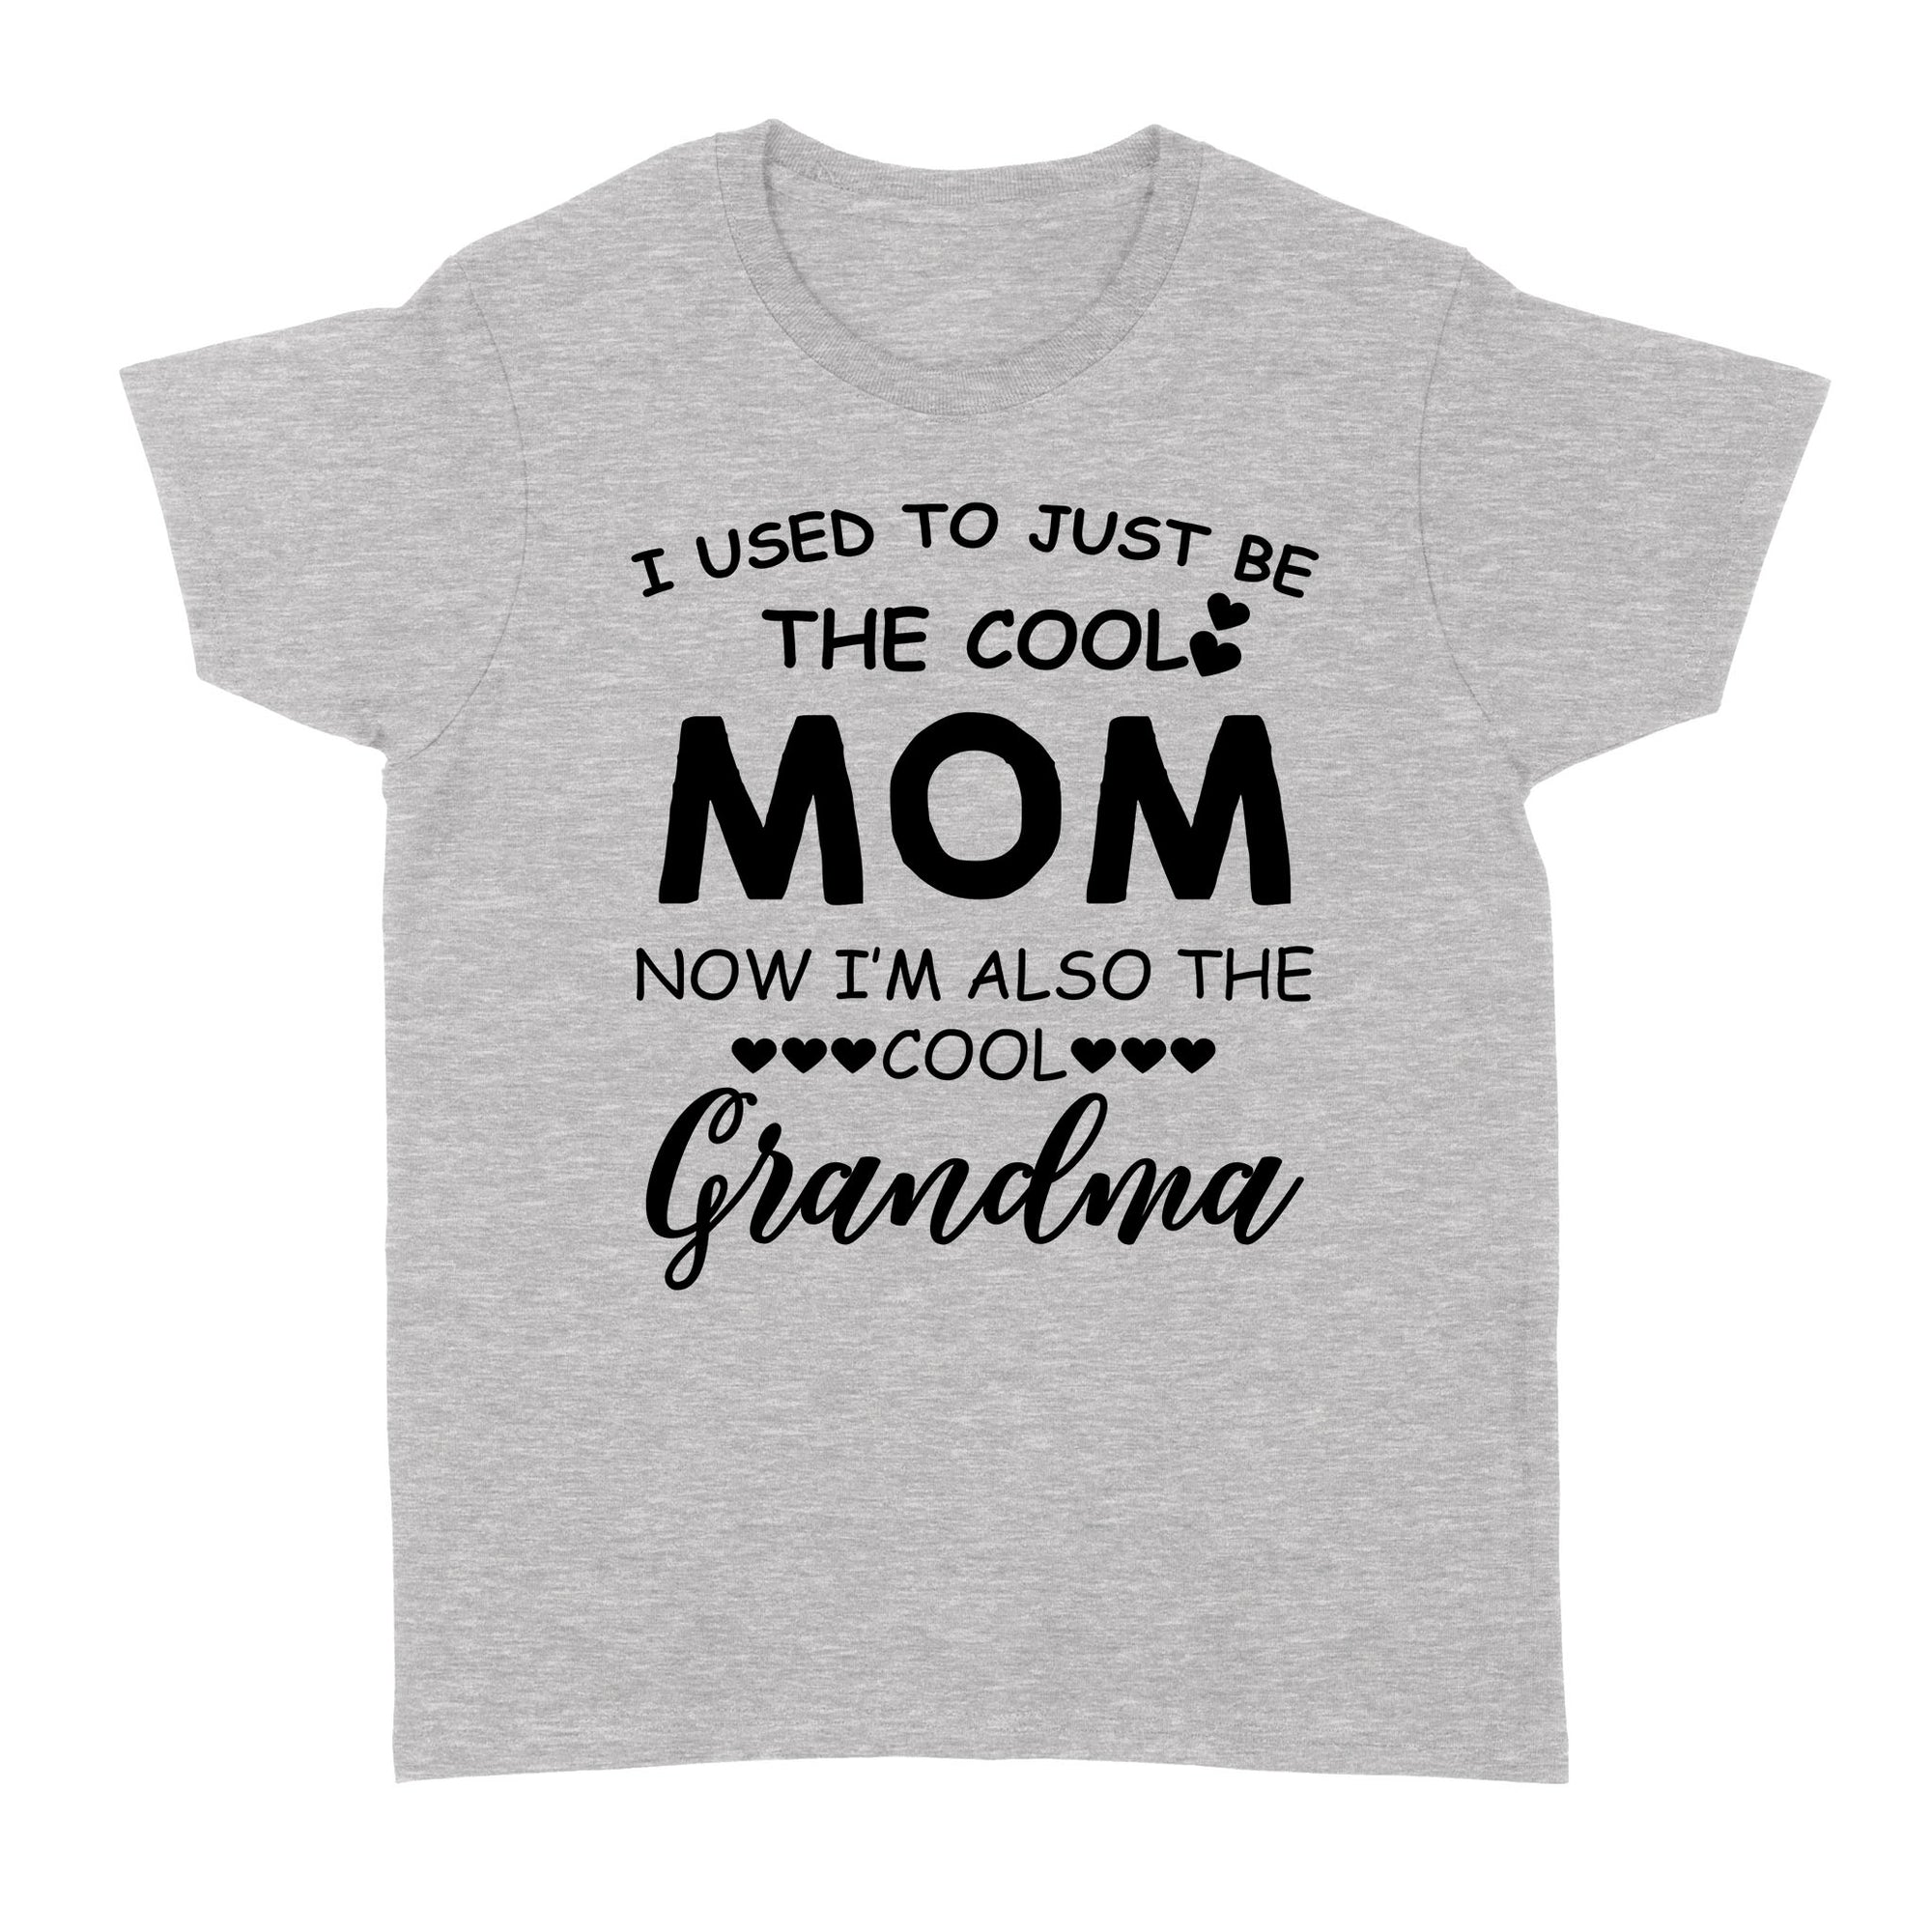 I Used To Just Be The Cool Mom Now I'm Also The Cool Grandma w Funny Gift Ideas for Grandma Standard Women's T-shirt